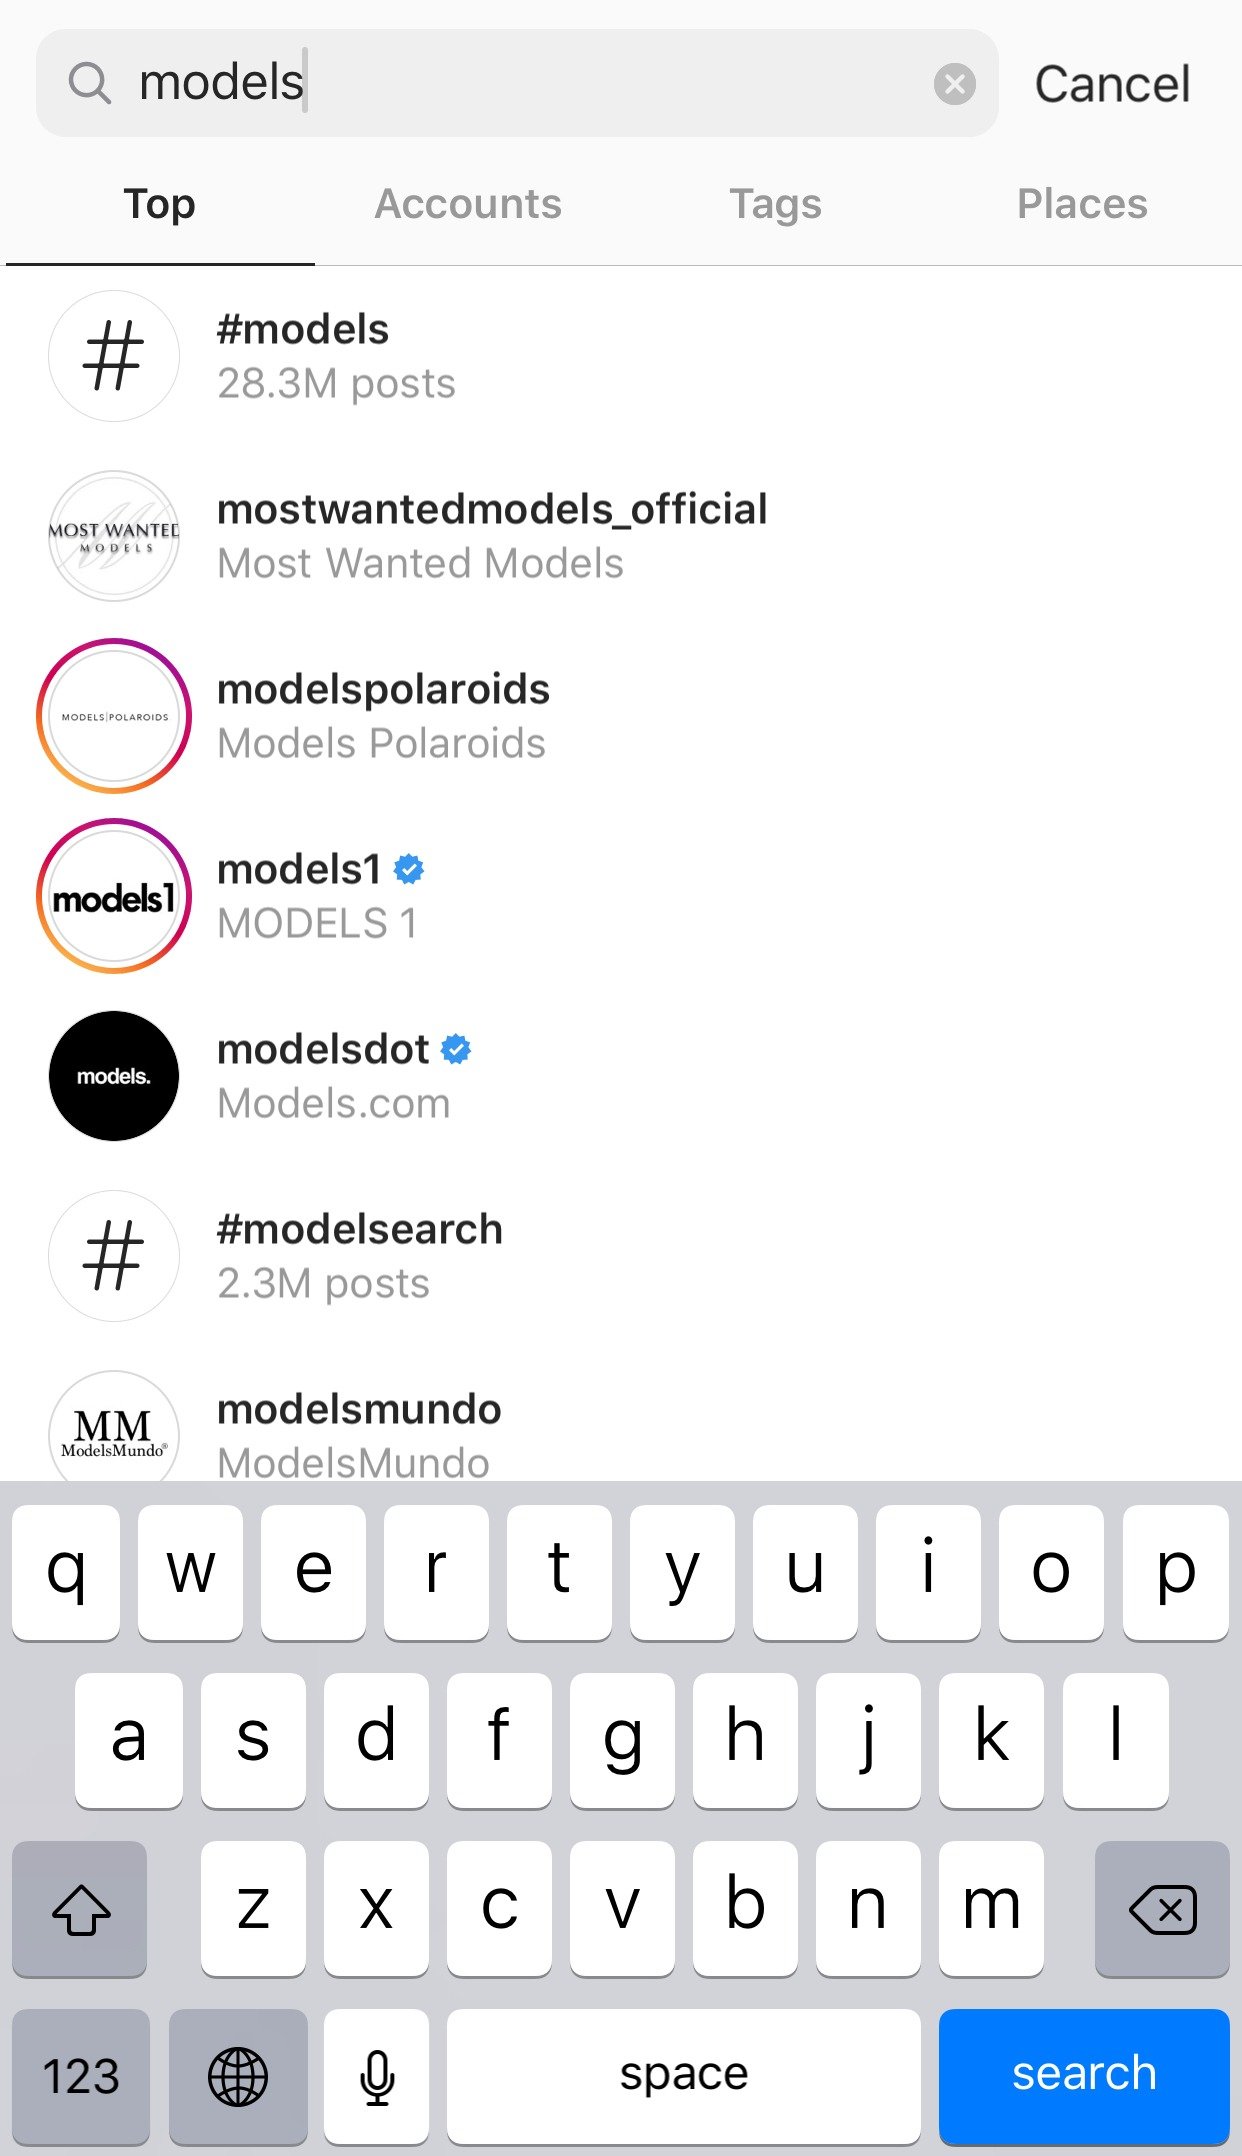 search for fashion models on instagram